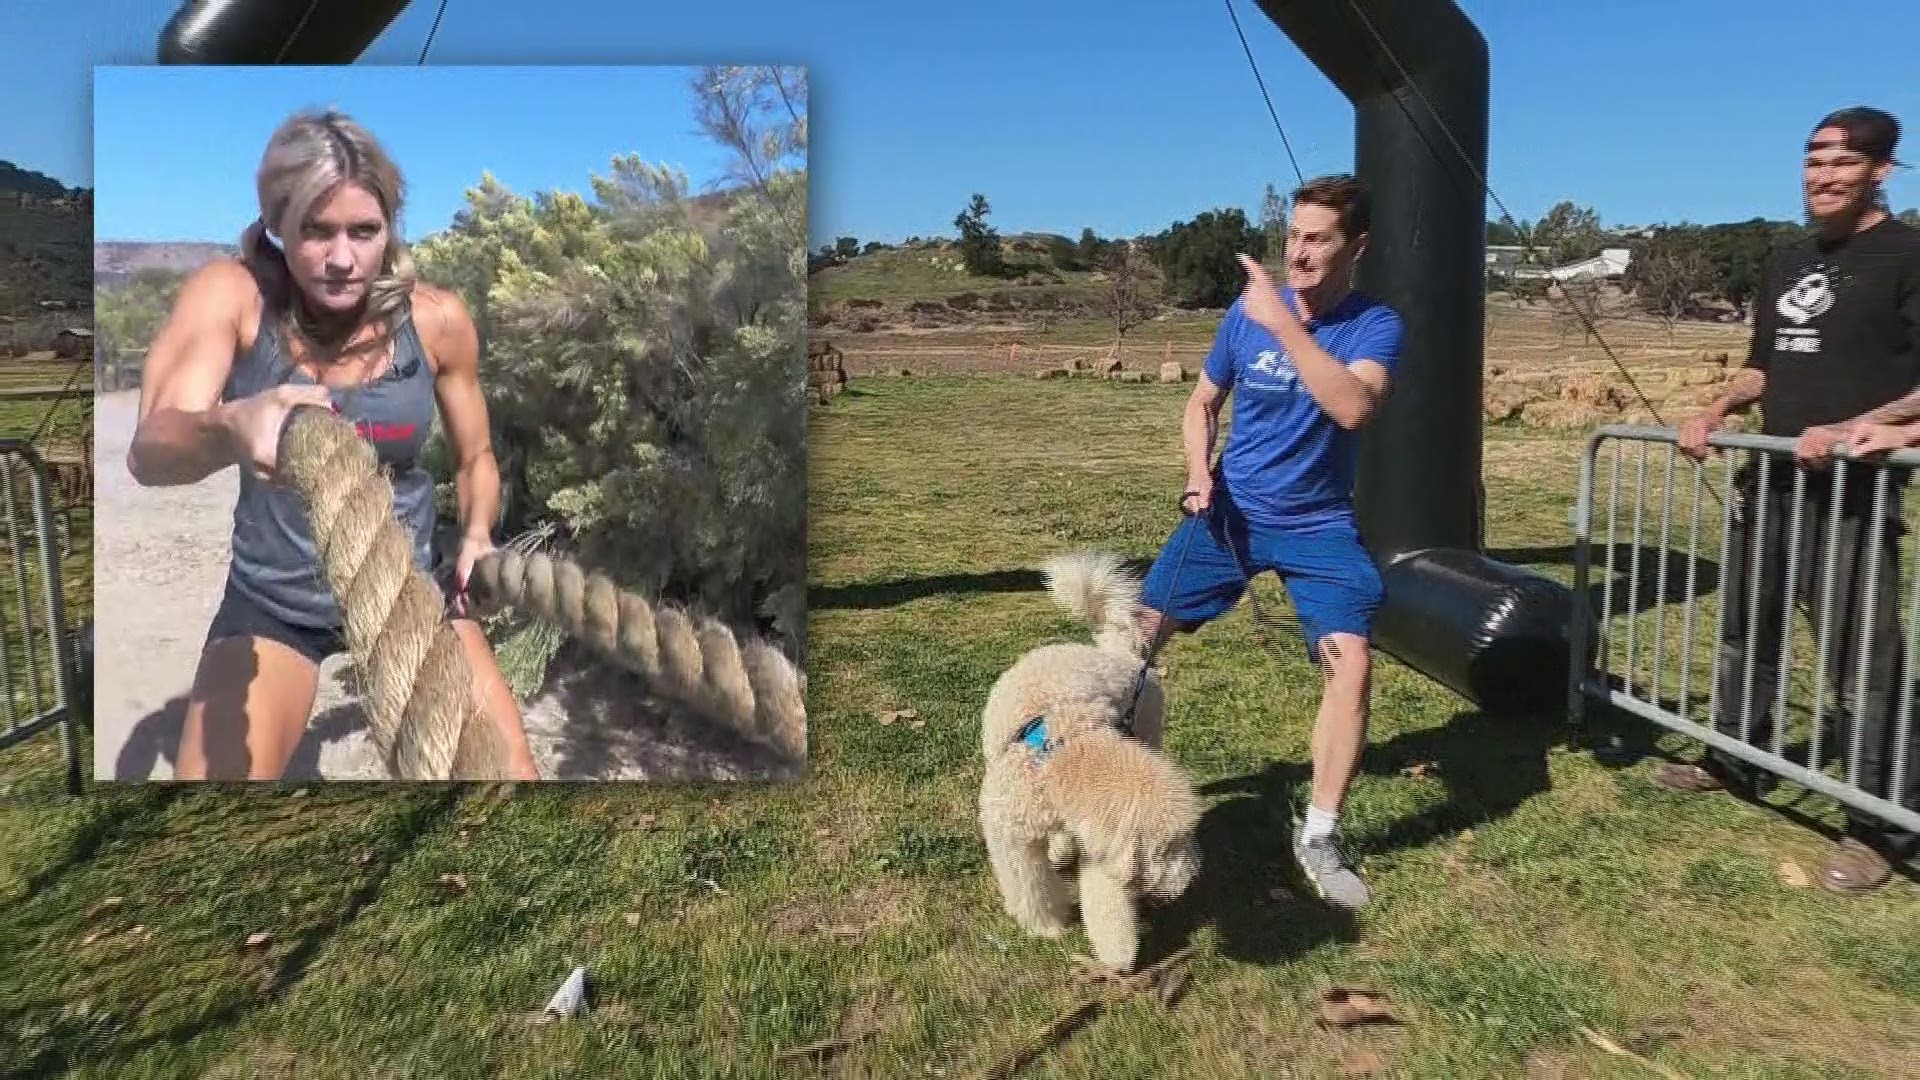 Jeff and his dog, Raleigh, preview the 5K run filled with 20 obstacles in Valley Center, north San Diego.